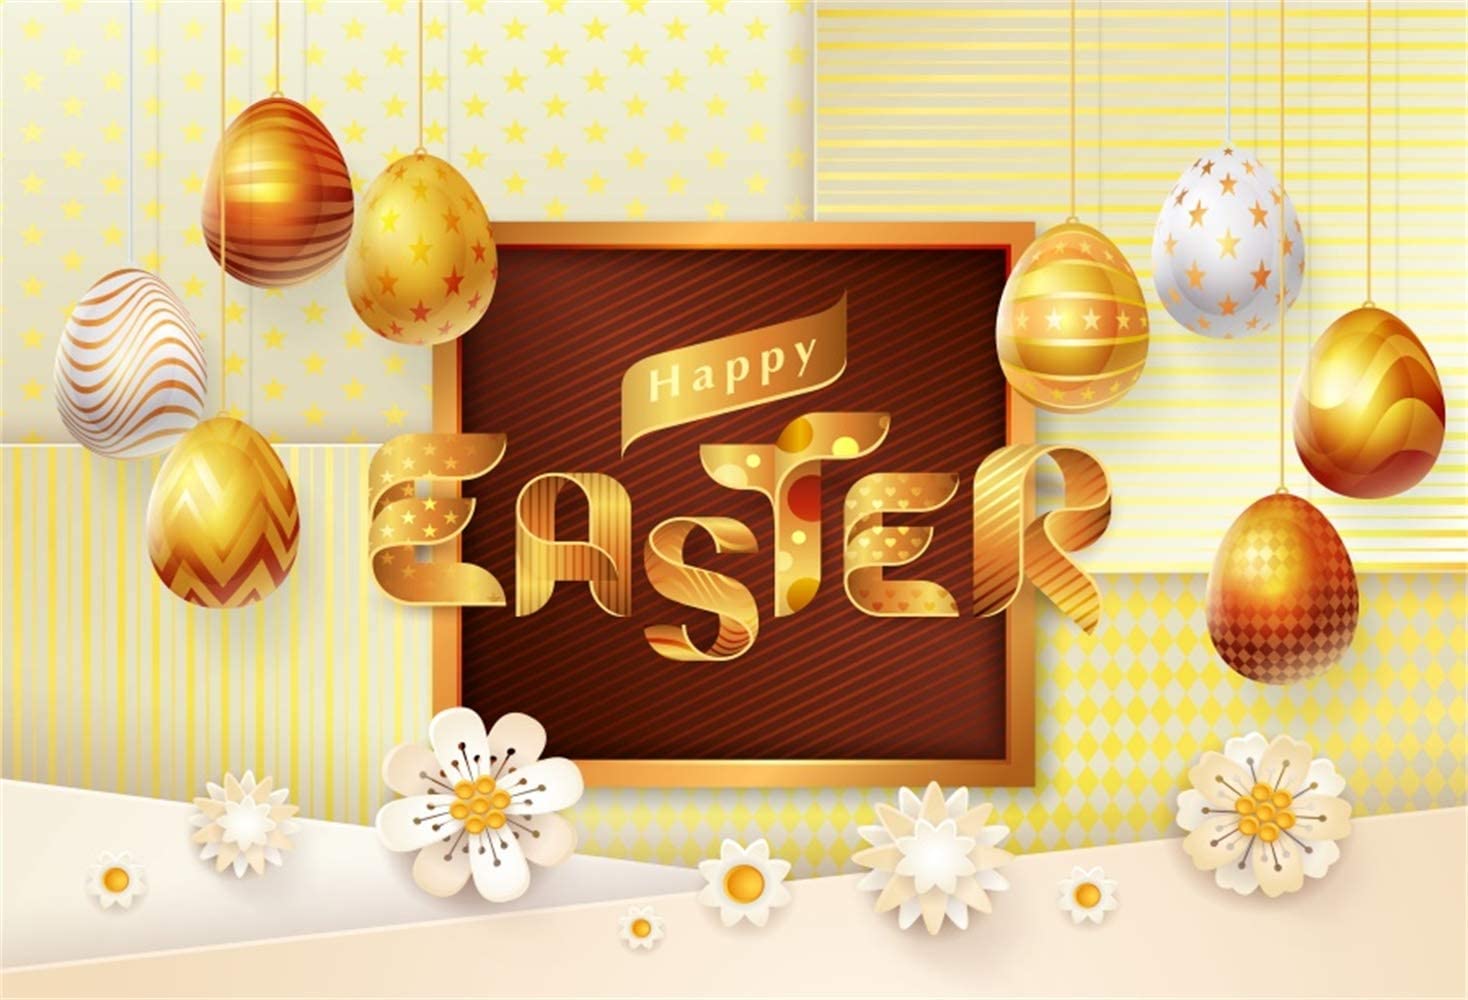 Amazon.com, Laeacco Happy Easter 5x3ft Vinyl Photography Background Cartoon Hanging Golden Easter Eggs Flowers Decors Backdrop Community Easter Egg Hunt Day Banner Wallpaper Child Baby Shoot Poster, Camera & Photo